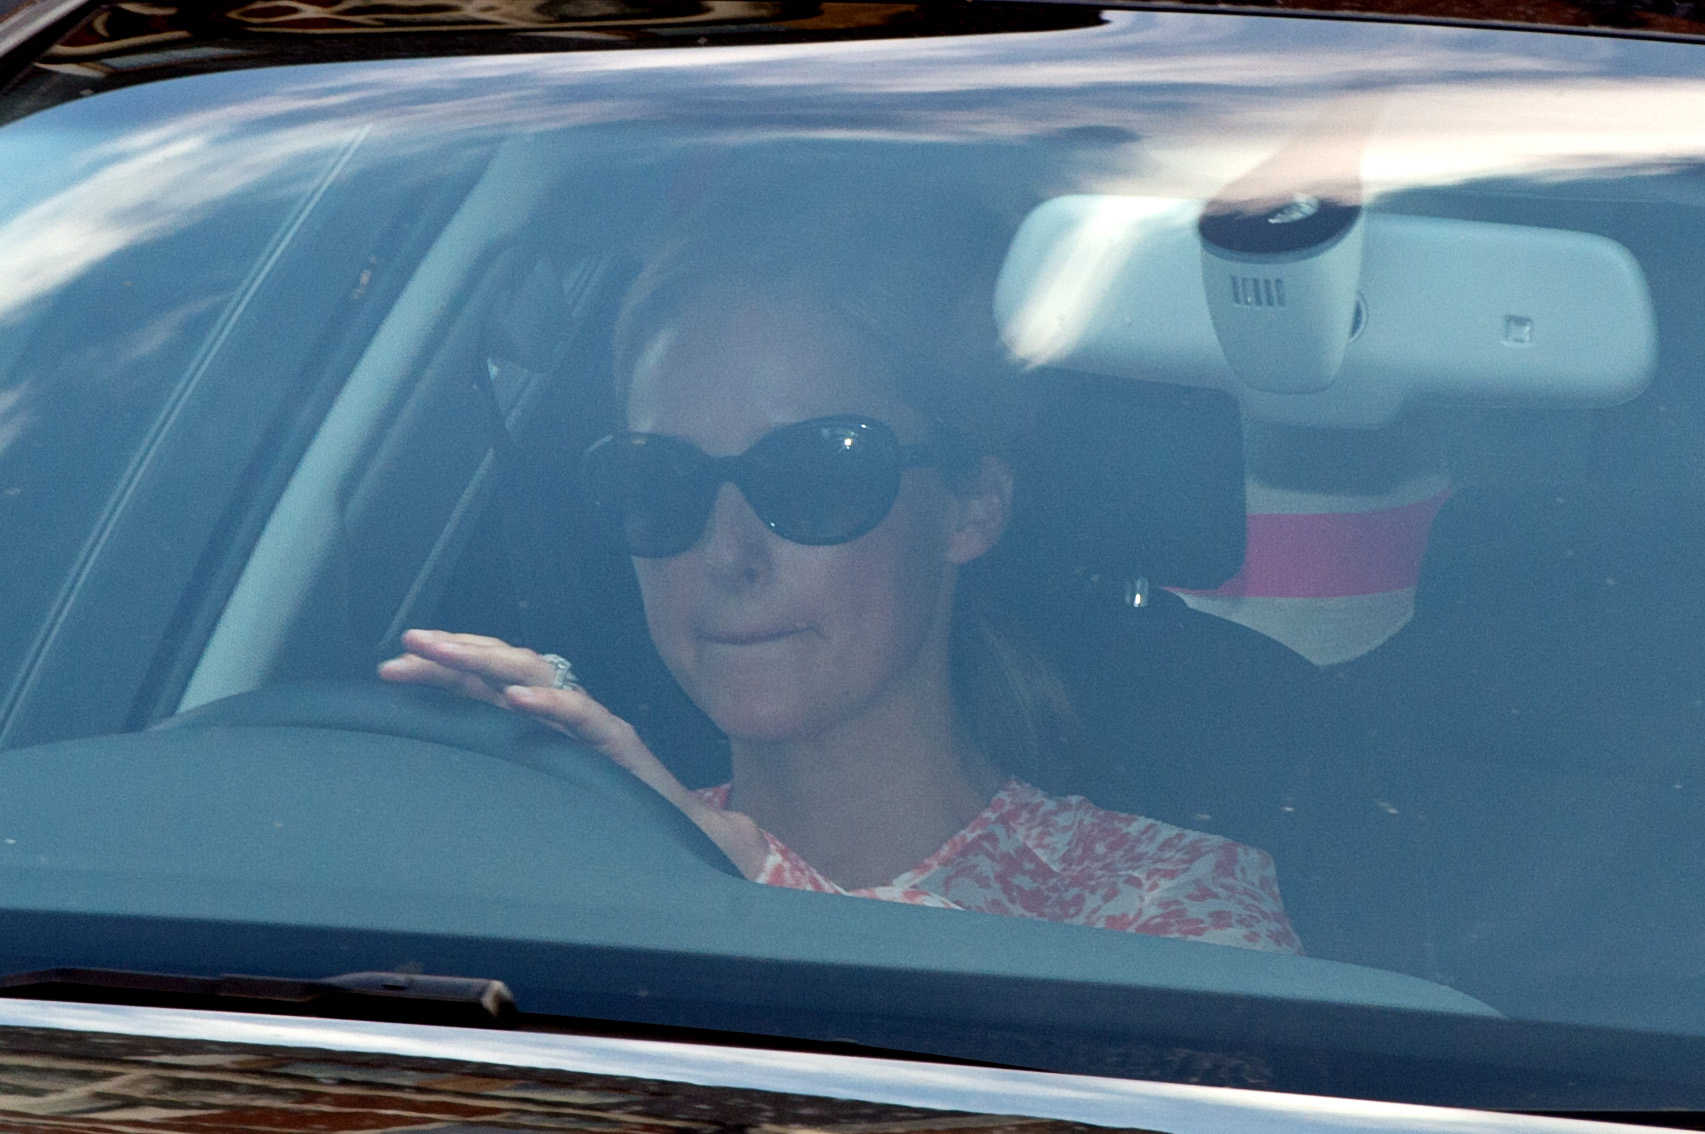 PHOTO: Emilia D'erlanger arrives at Kensington Palace as Prince George of Cambridge turns one year old on July 22, 2014 in London.
